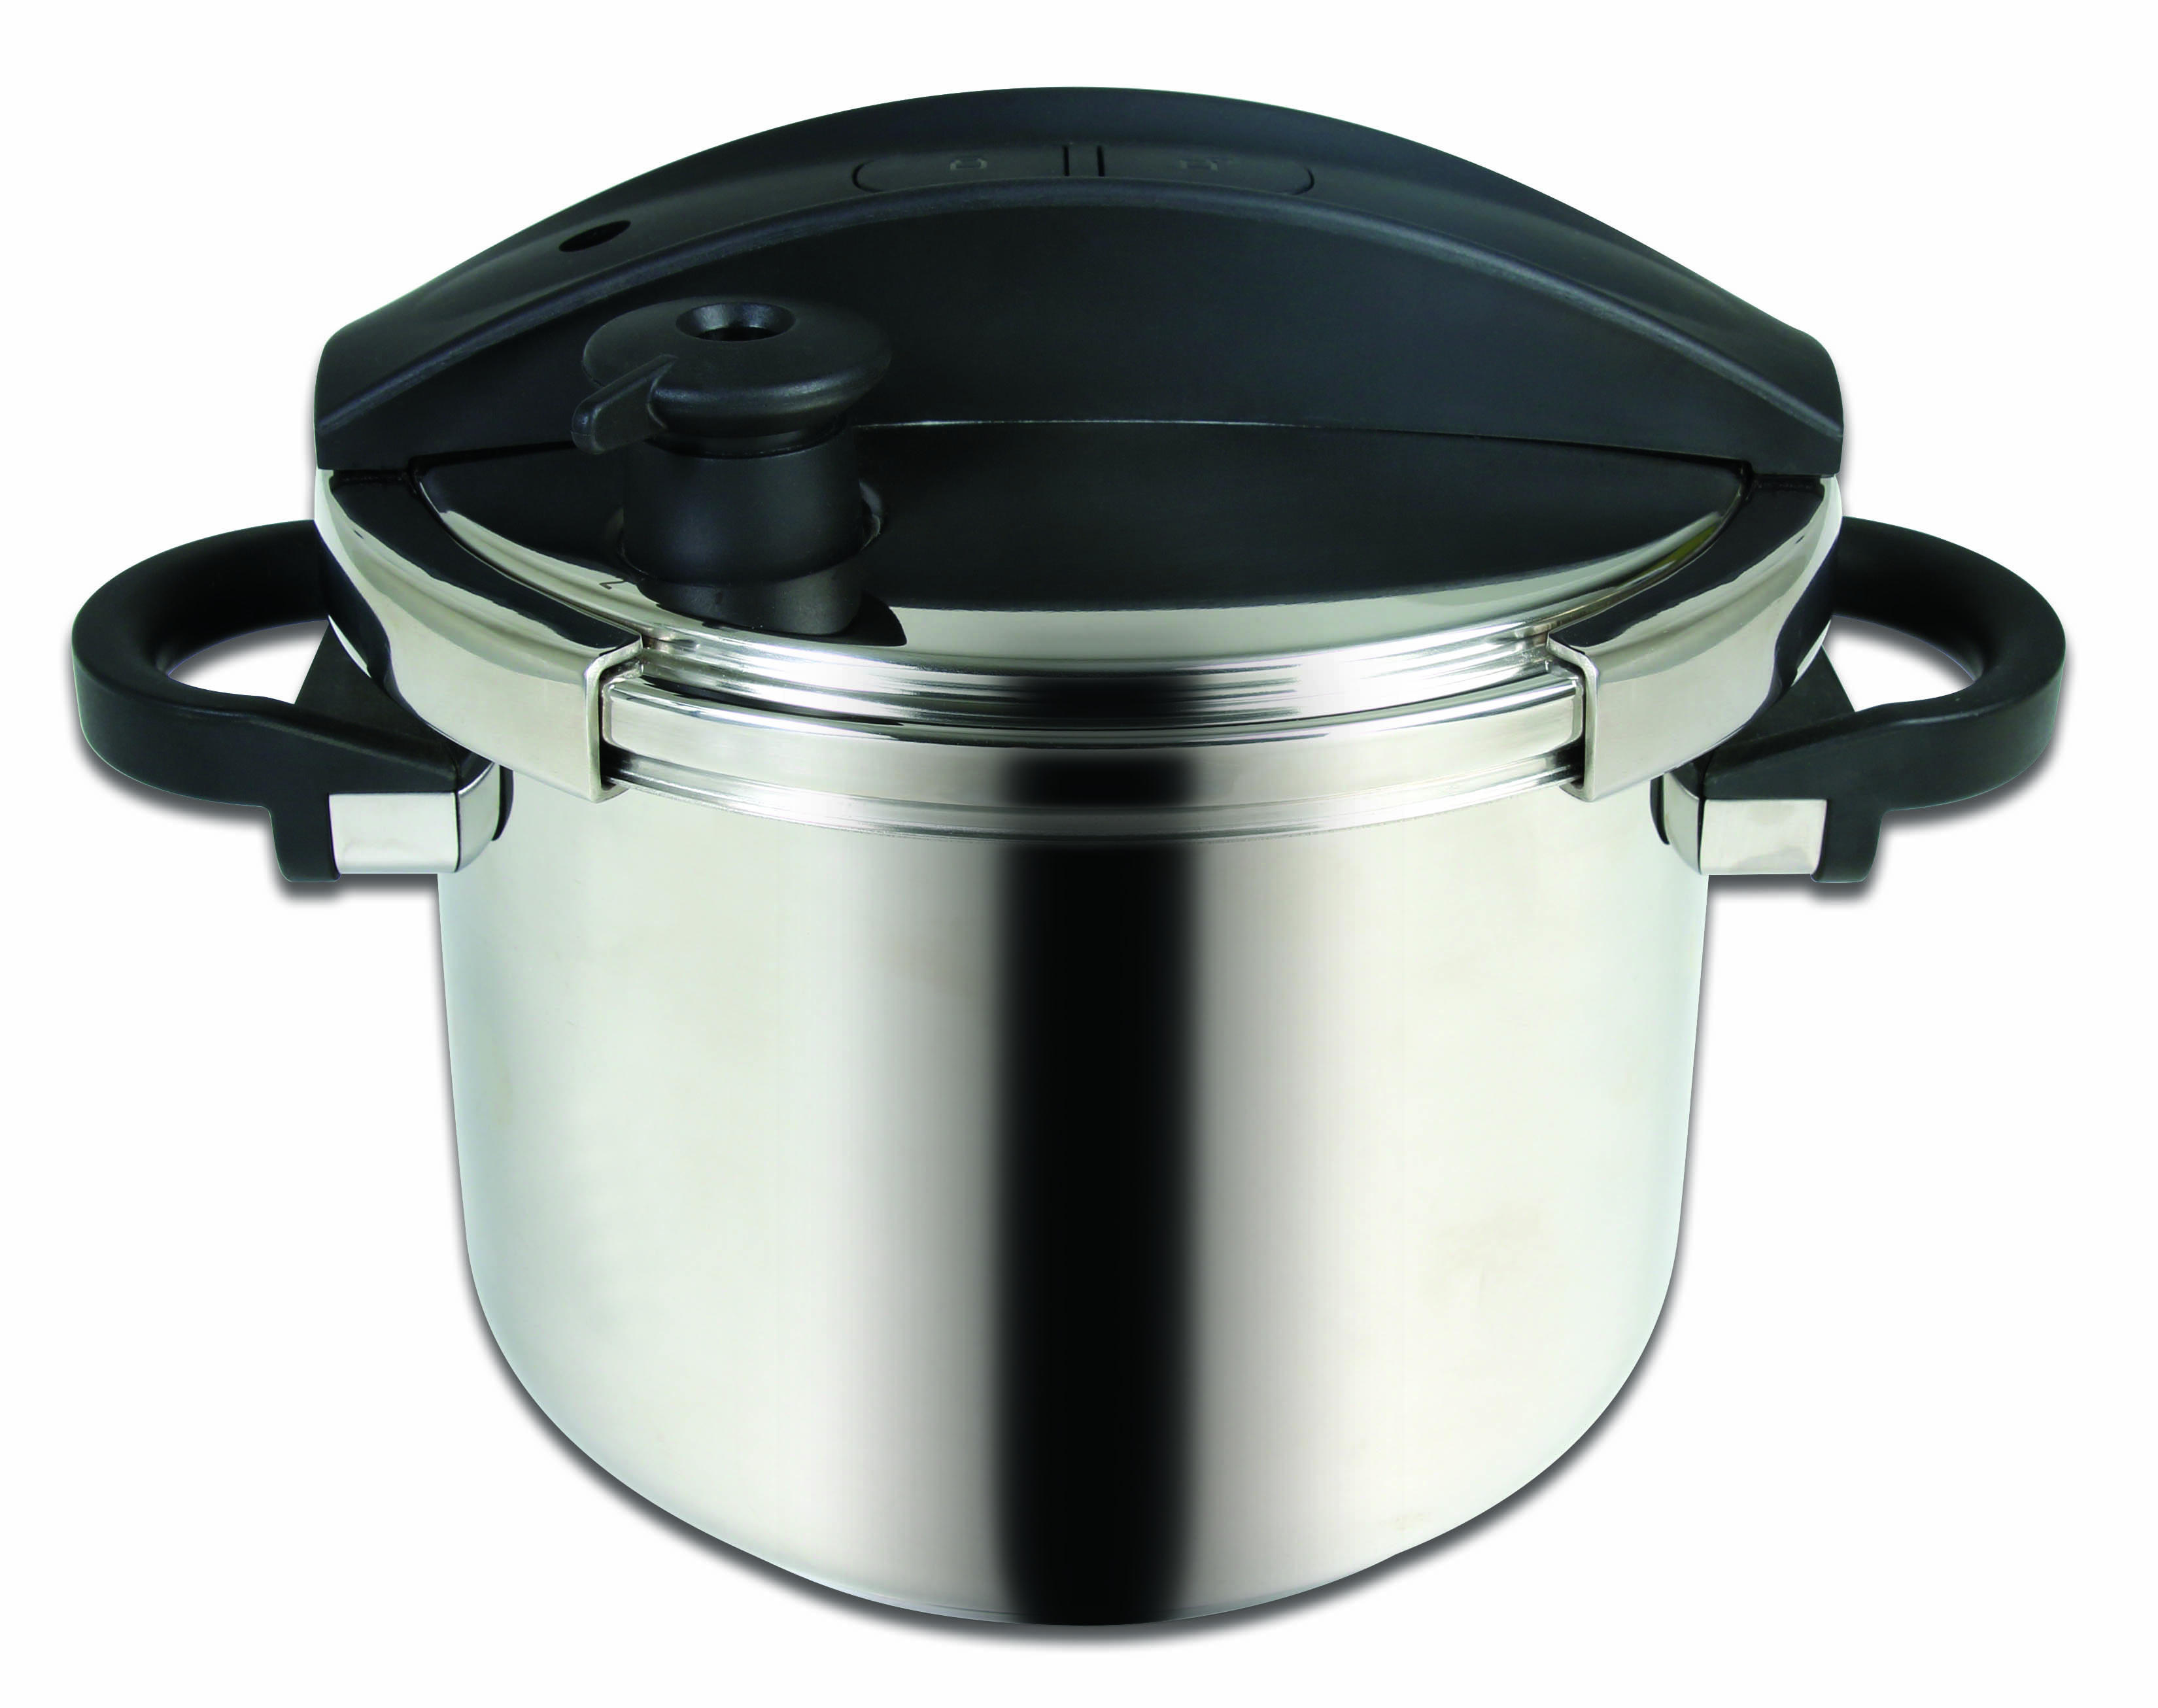 crofton pressure cooker instructions